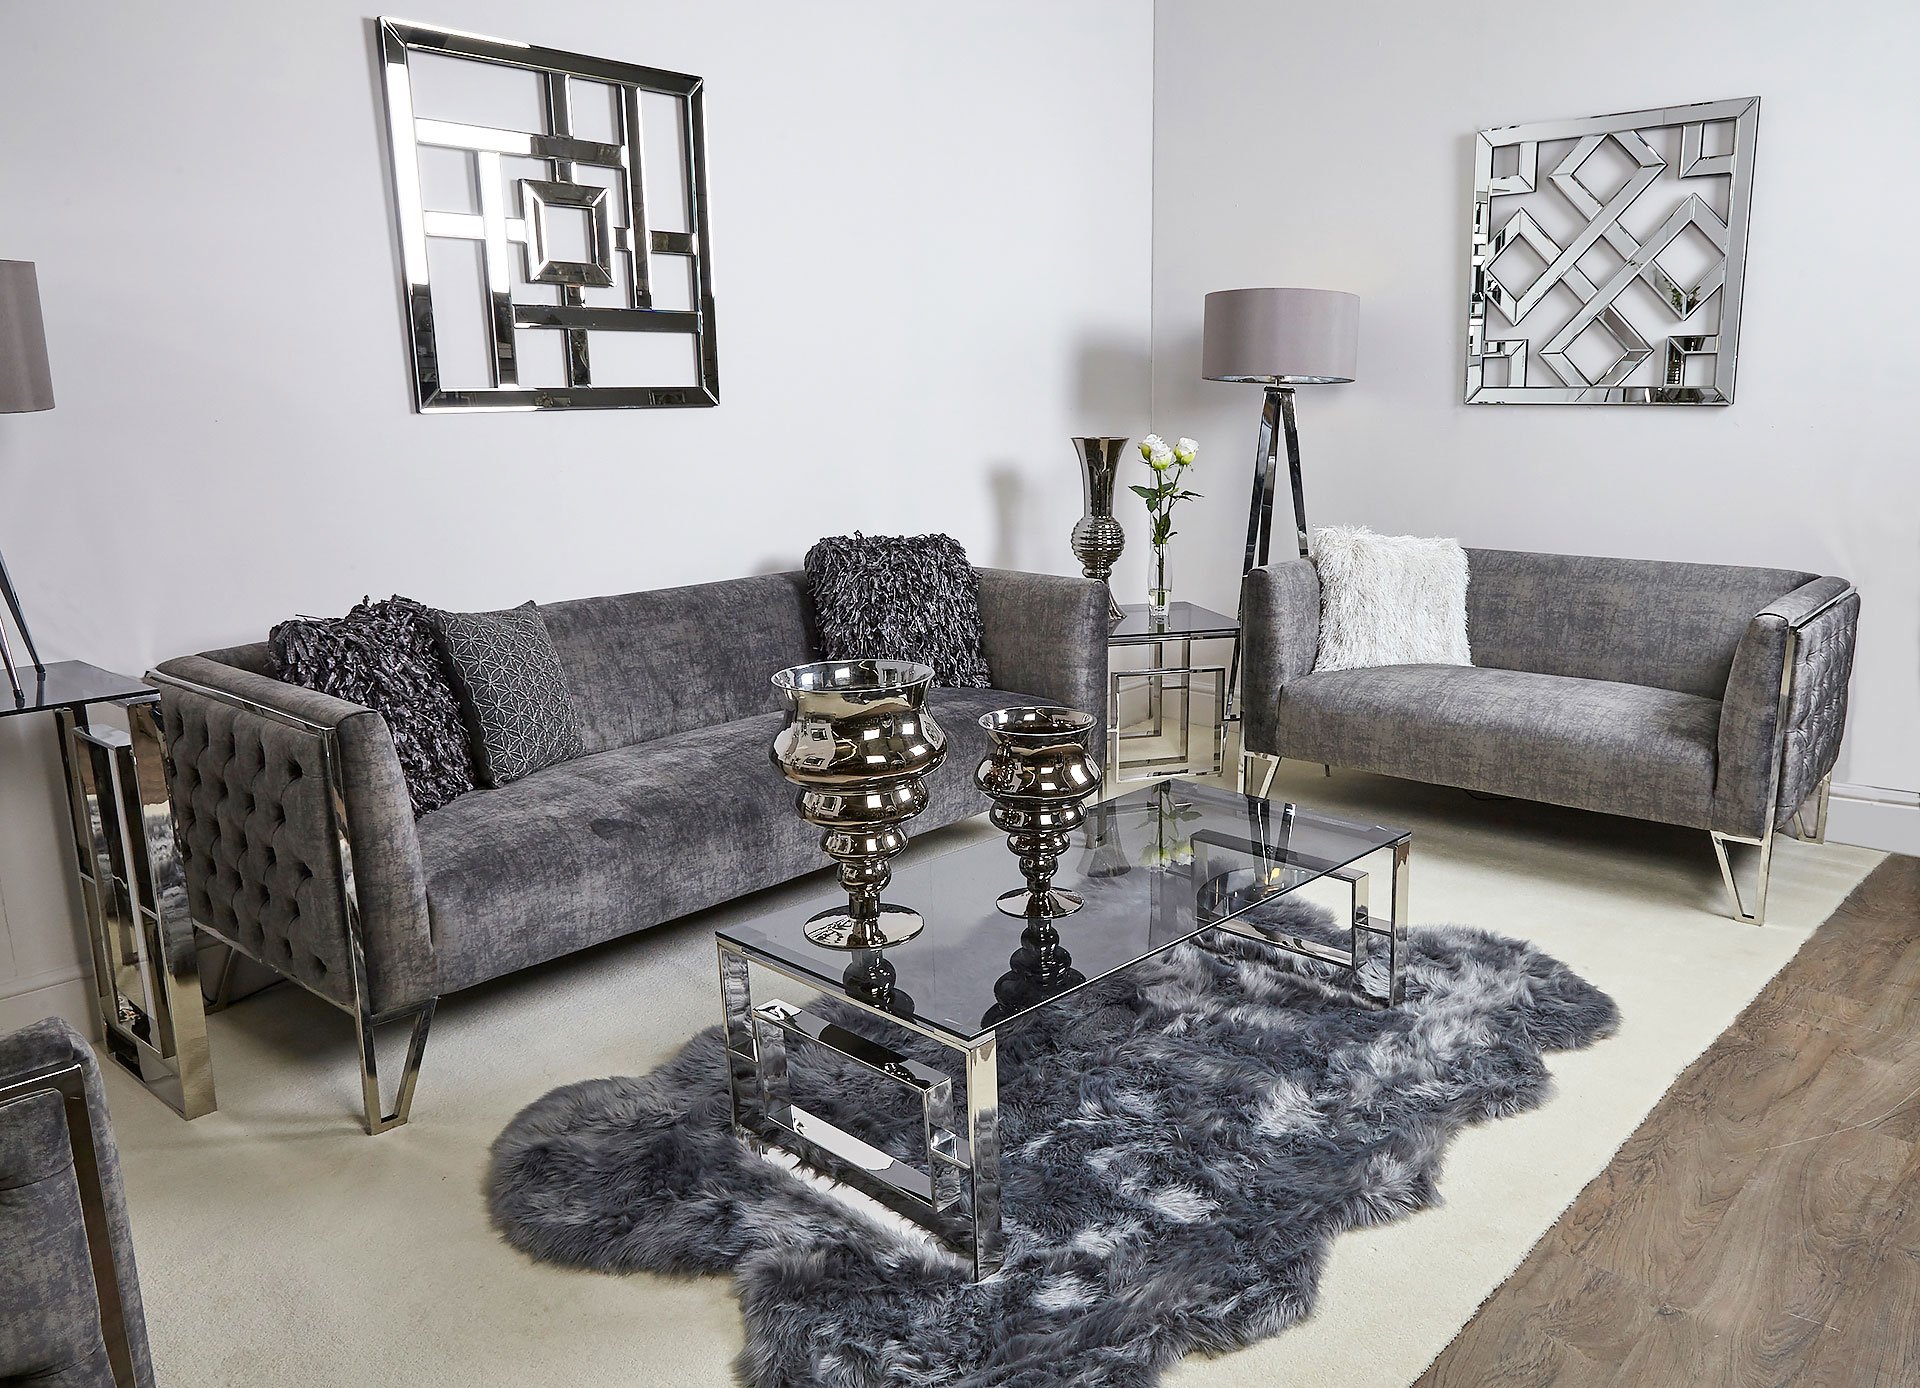 Creating an ultra modern and super stylish living room on a budget